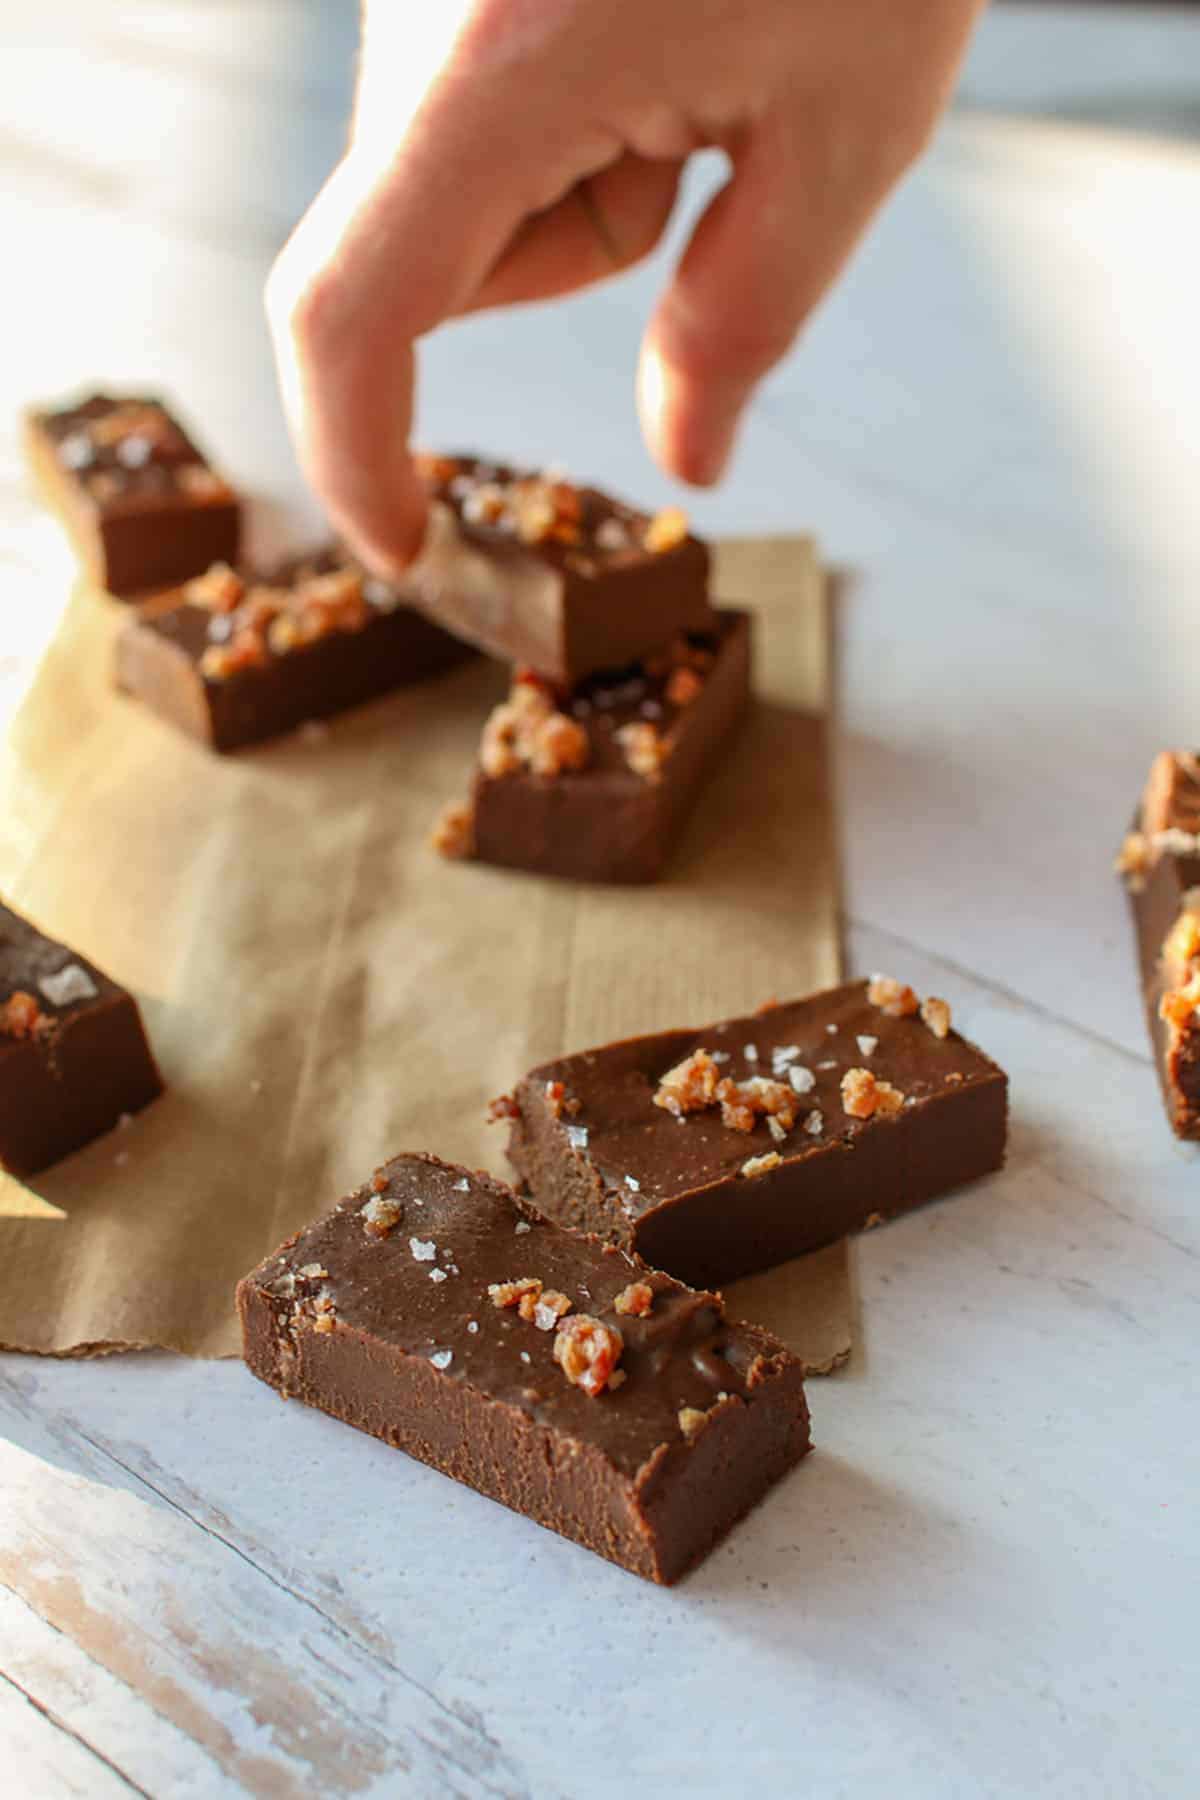 Bacon Fat Chocolate Fudge sliced long with a hand reaching one piece in the back. Fudge is on a piece of paper lunch bag.